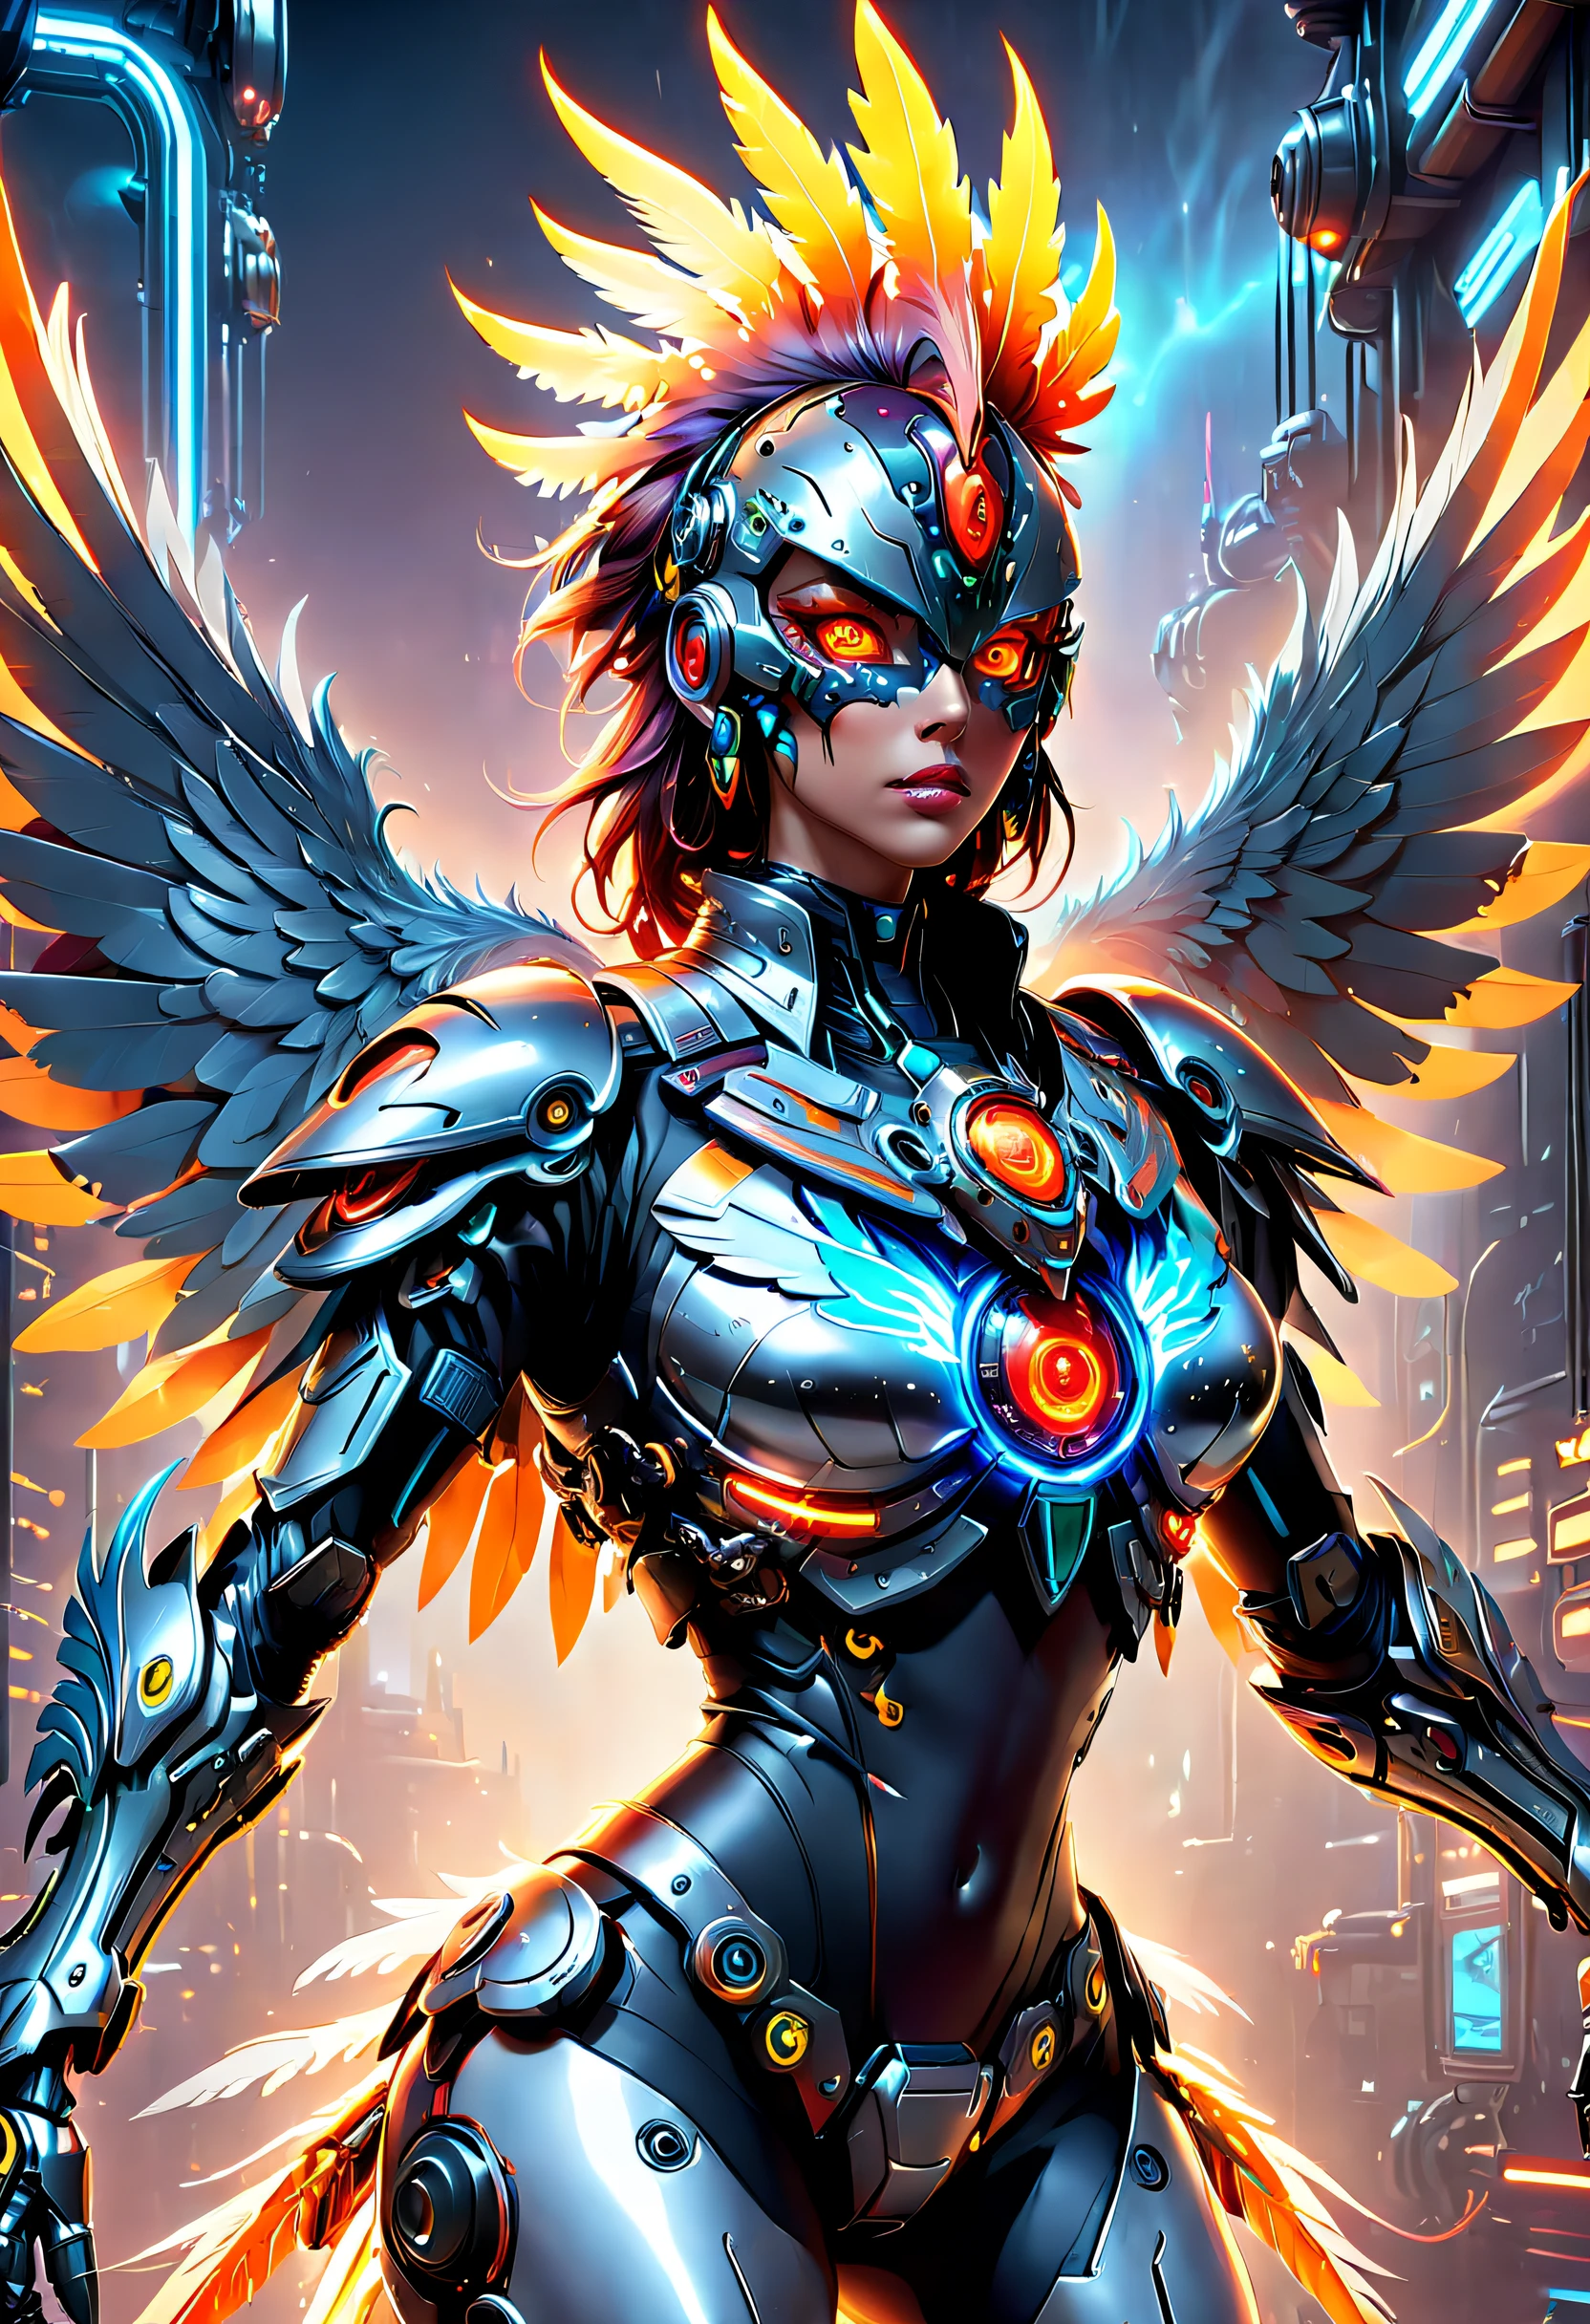 (Best quality, 8K, A high resolution, tmasterpiece:1.2), （Ultra-detailed), (Cybertron futuristic mechanical Gallic rooster), full bodyesbian, dreamy glow，luminous neon lights，Cyberpunk high-tech mechanical parts,Metal claws and wings,Metal heads and pecks,Metal feathers,Extremely cool,Metal legs,Bionic eye,Detailed feather design,sharp beak,hovers in mid-air,Electric red and bright orange,Vivid glowing eyes,Reflective metal surface,Interlocking mechanical gears,Dynamic and stylish design,motion blur effect,meticulous craftsmanship,Sci-fi atmosphere,Streamlined aerodynamic shape,Laser scanning pattern,holographic projections,Light-emitting circuit lines,hauntingly beautiful,Otherworldly precision,Advanced sensors,Complex algorithms,Ominous and mysterious atmosphere,electric sparks,Shiny chrome plating,Futuristic propulsion system，solo，Medium shot，concept-art, Fantasy theme,voluminetric lighting, Global illumination, Reflection, hyper HD，The light is bright，RGB colors，vibrant with colors, mecha musume，McCorg gear，cyber punk style